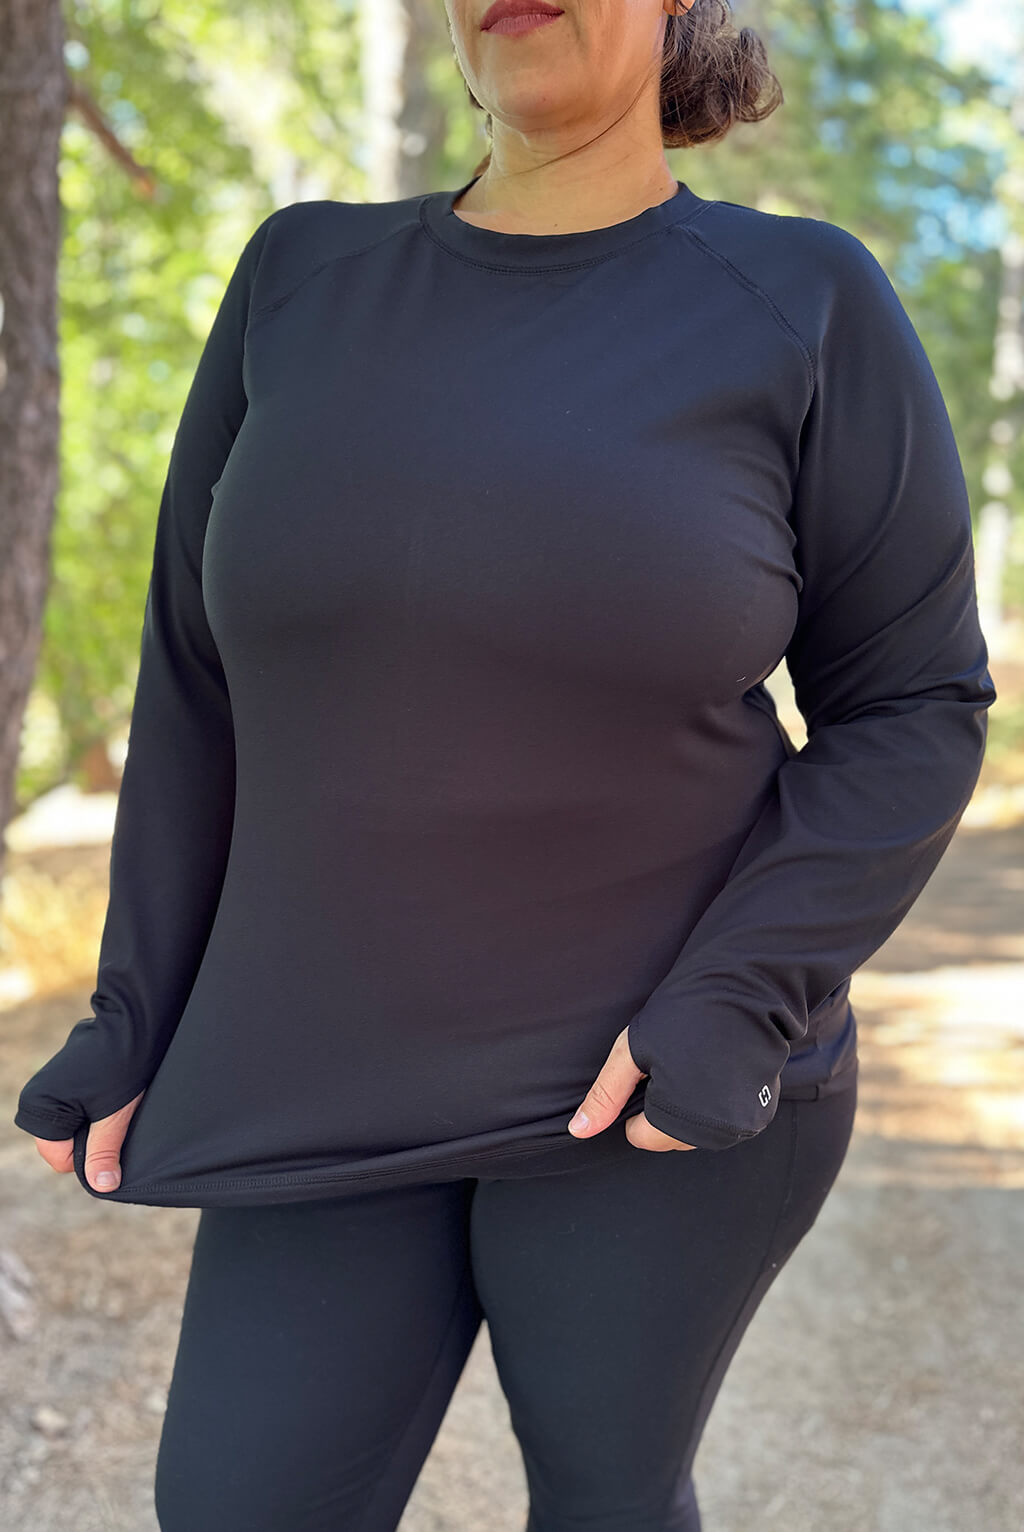 Shop Women'S Compression Tops Long Sleeve Moisture Wicking Workout